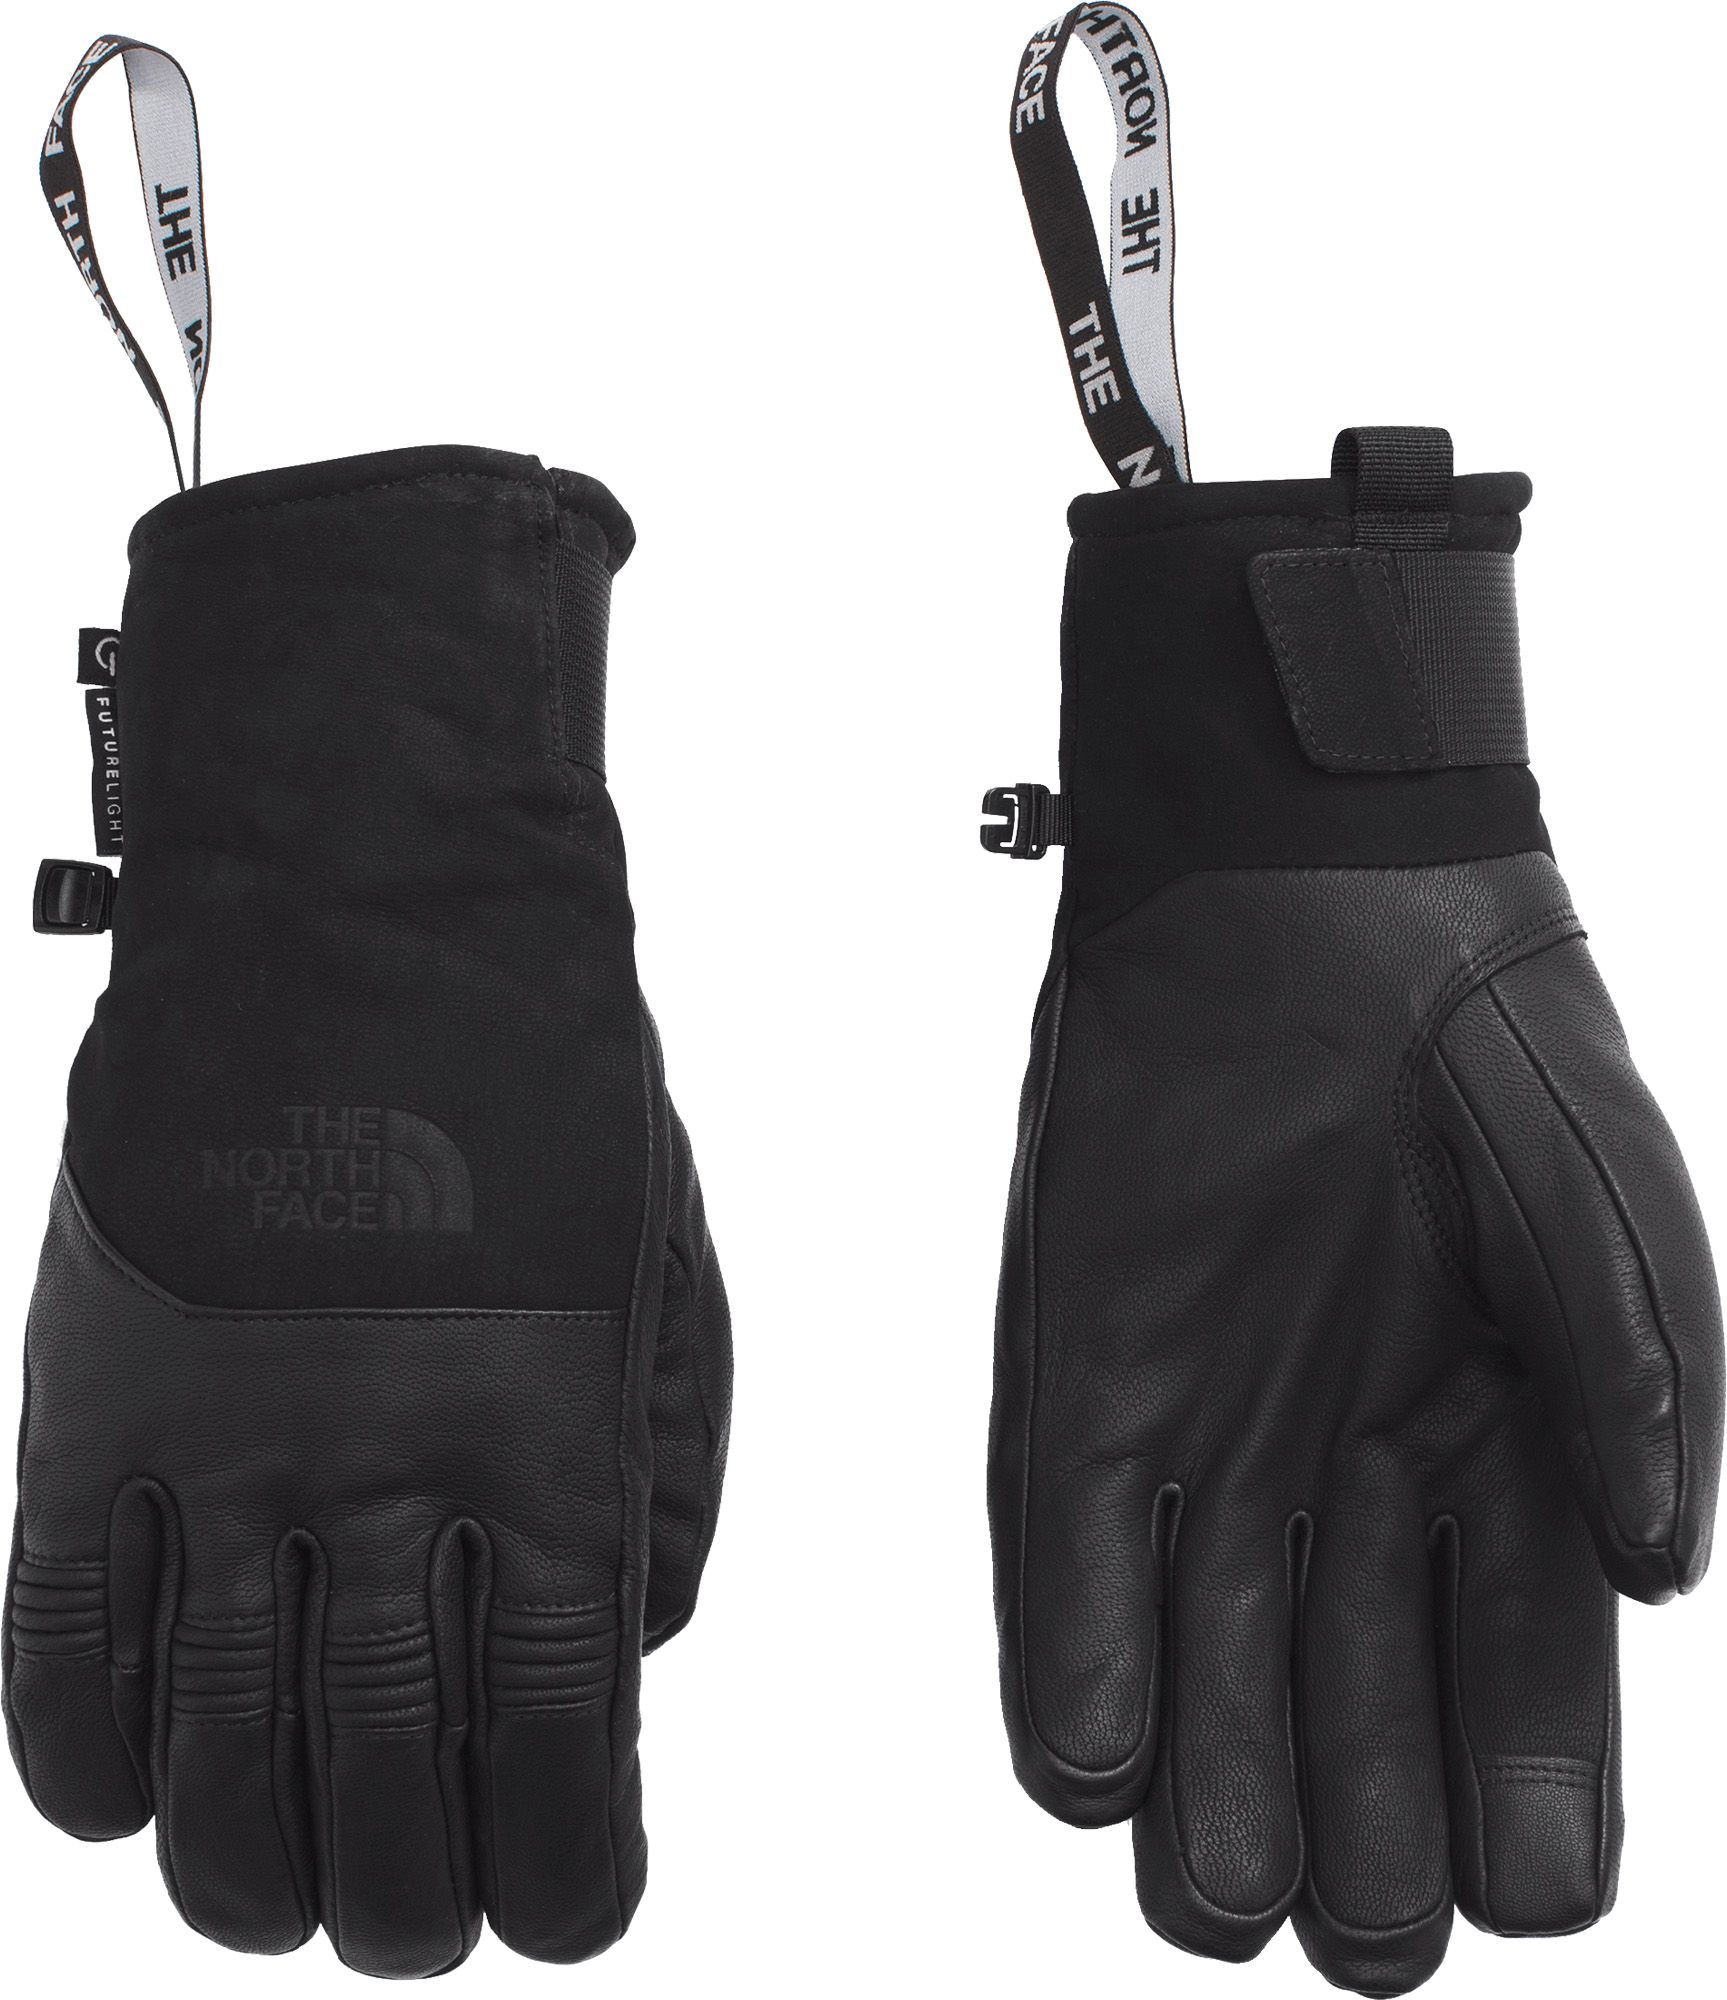 dicks sporting goods north face gloves